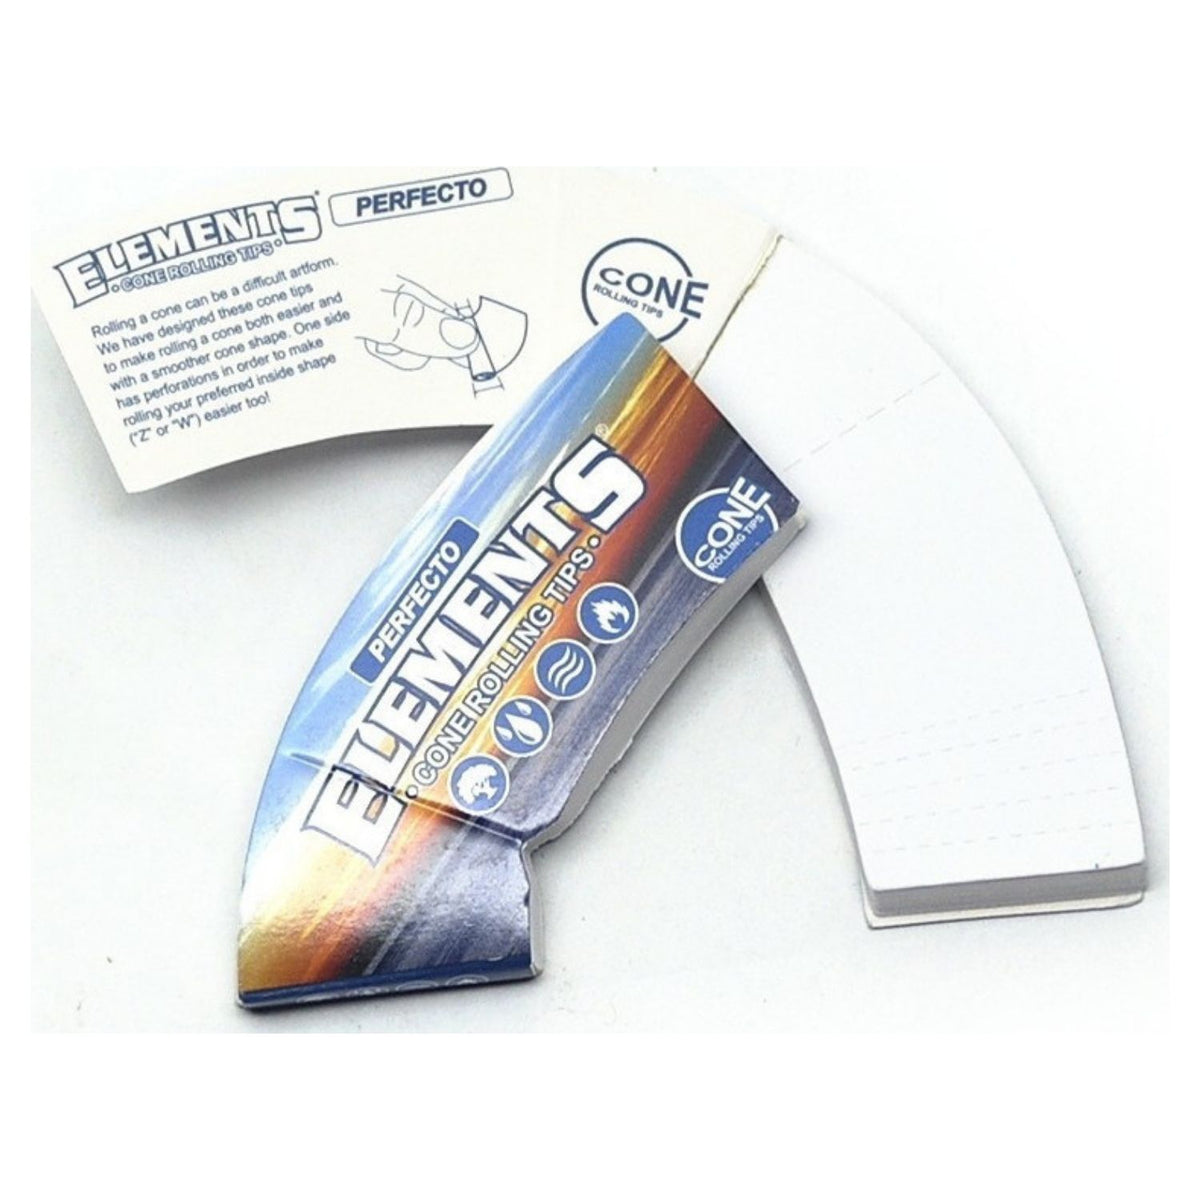 Elements Perfecto Cone Filter Tips - 32 Tips